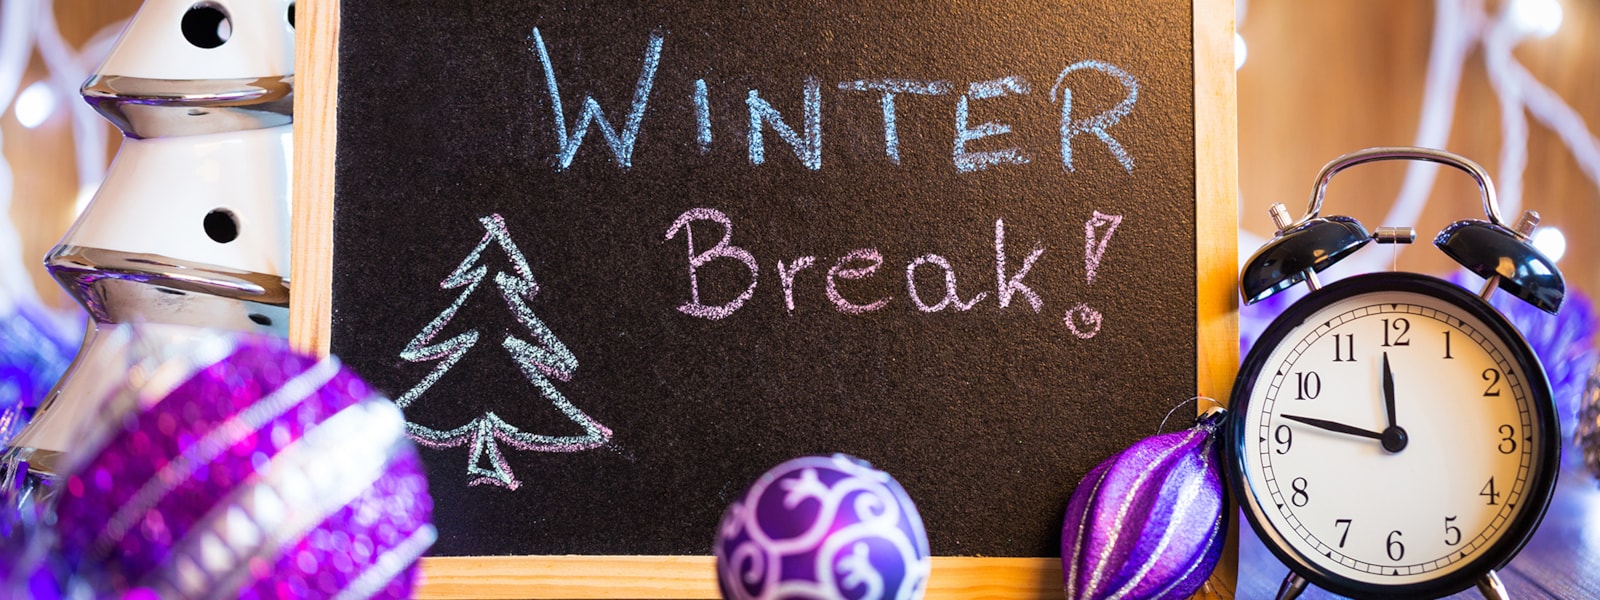 winter break sign with a clock and ornaments